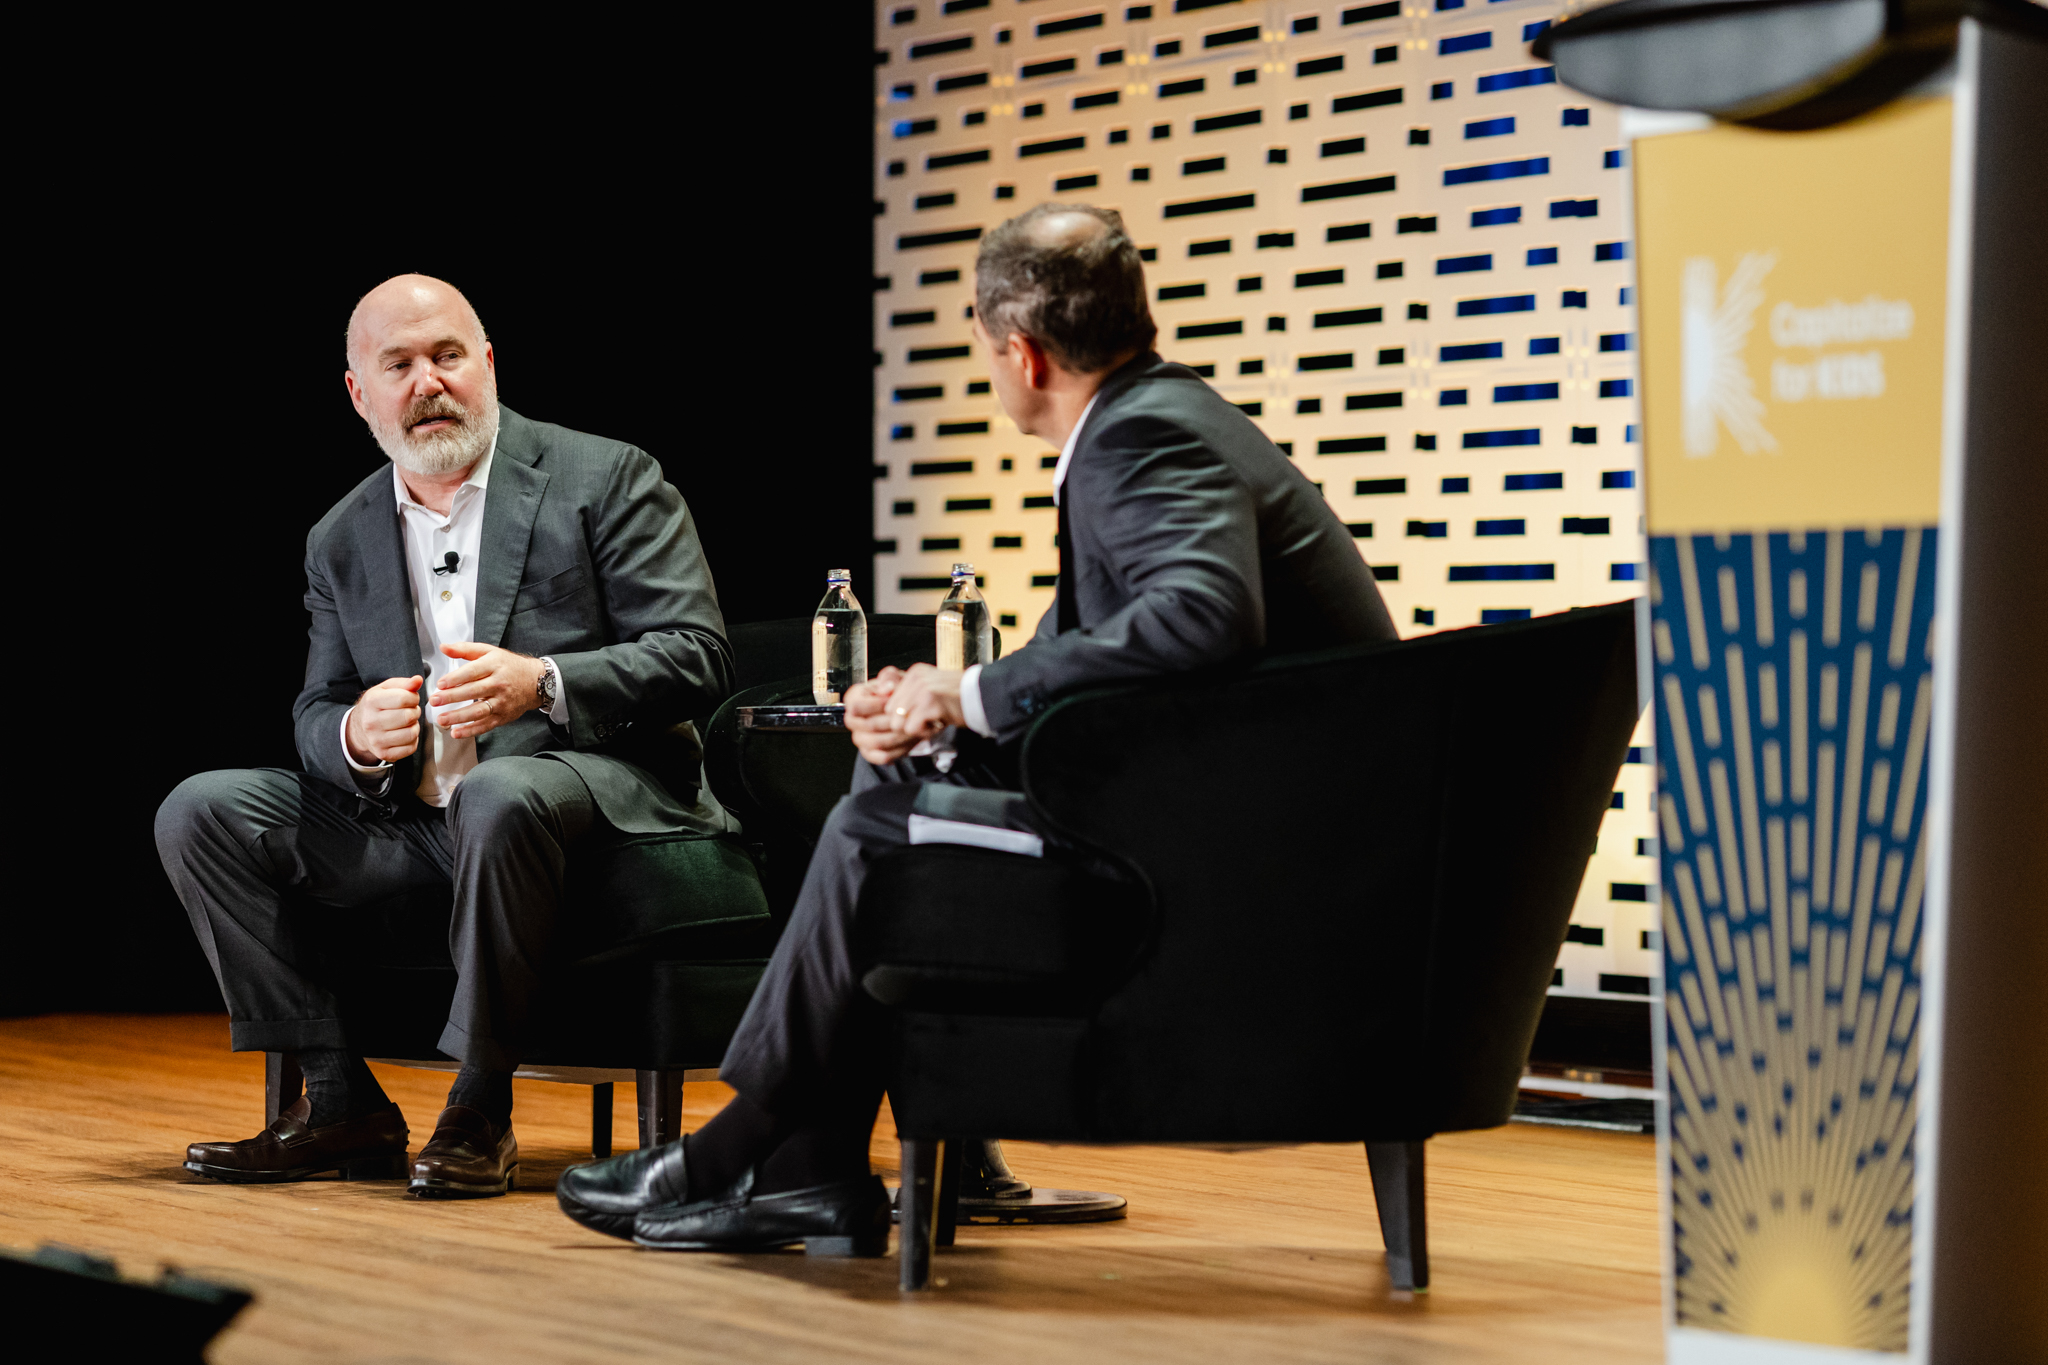 Conference Photography: Two men seated on a stage.